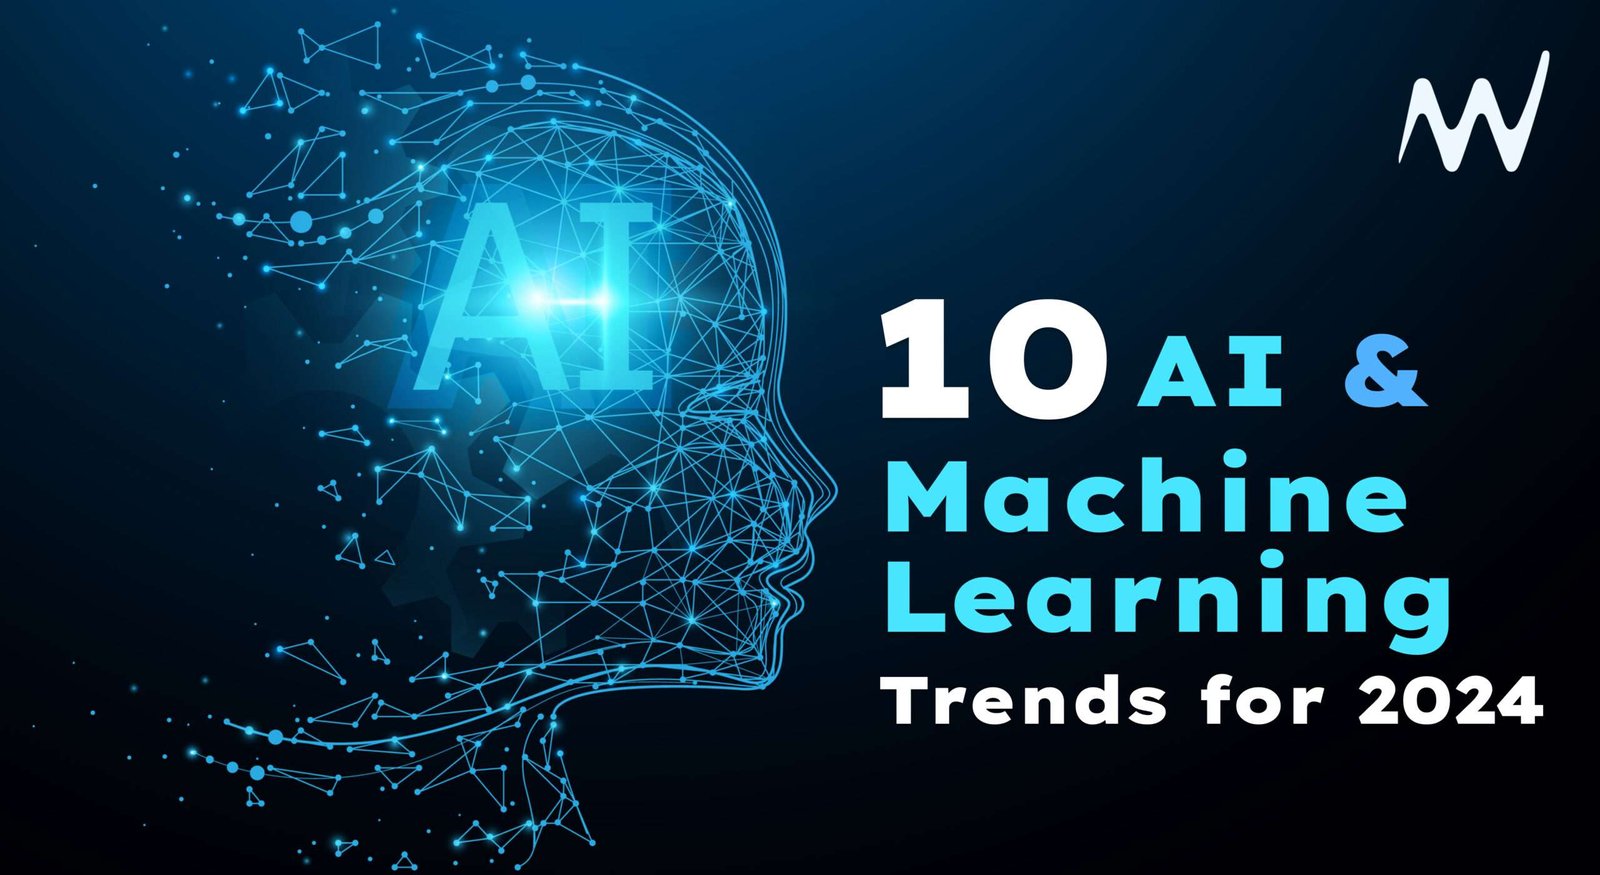 AI & Machine Learning Trends 2024 IMG